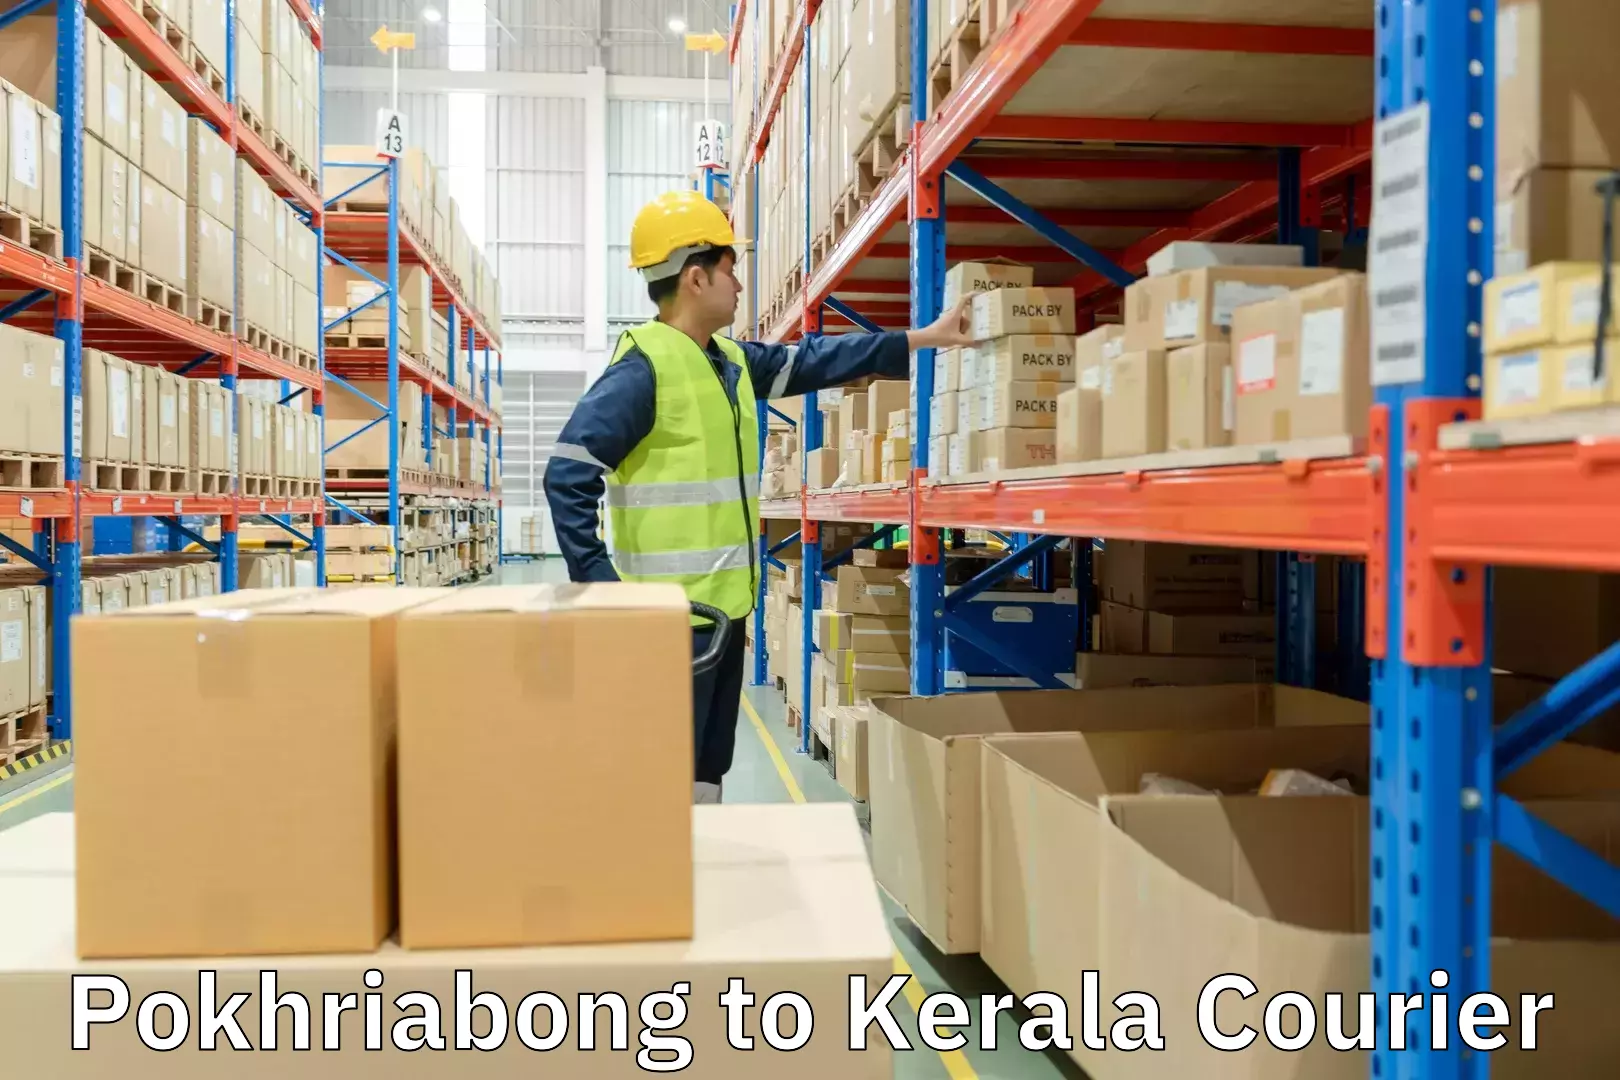 Enhanced tracking features Pokhriabong to Kerala